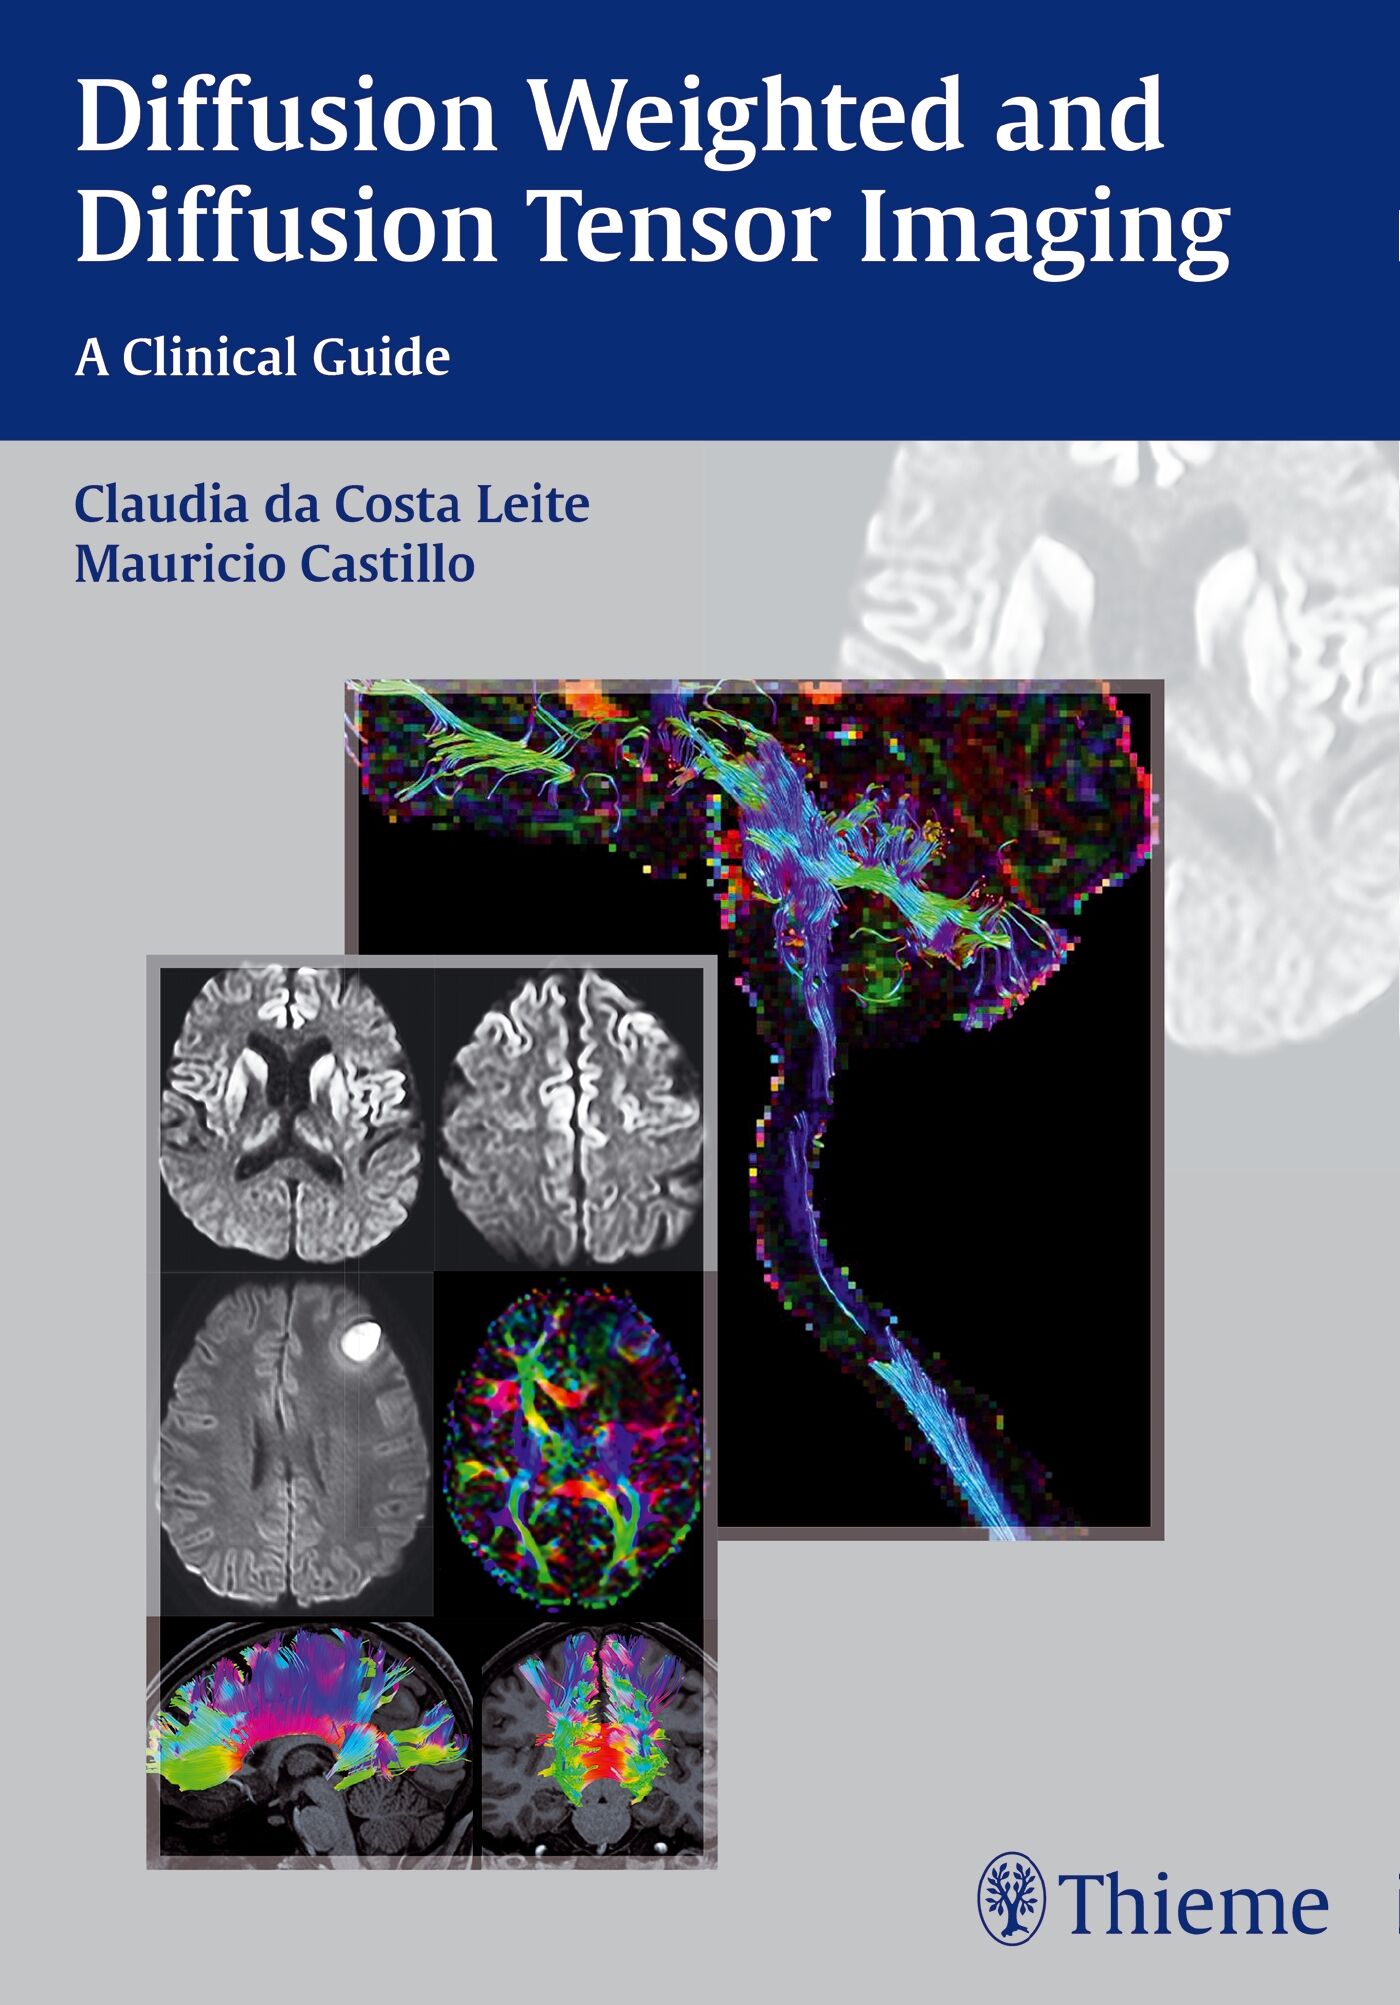 Diffusion Weighted and Diffusion Tensor Imaging, 9781626230217